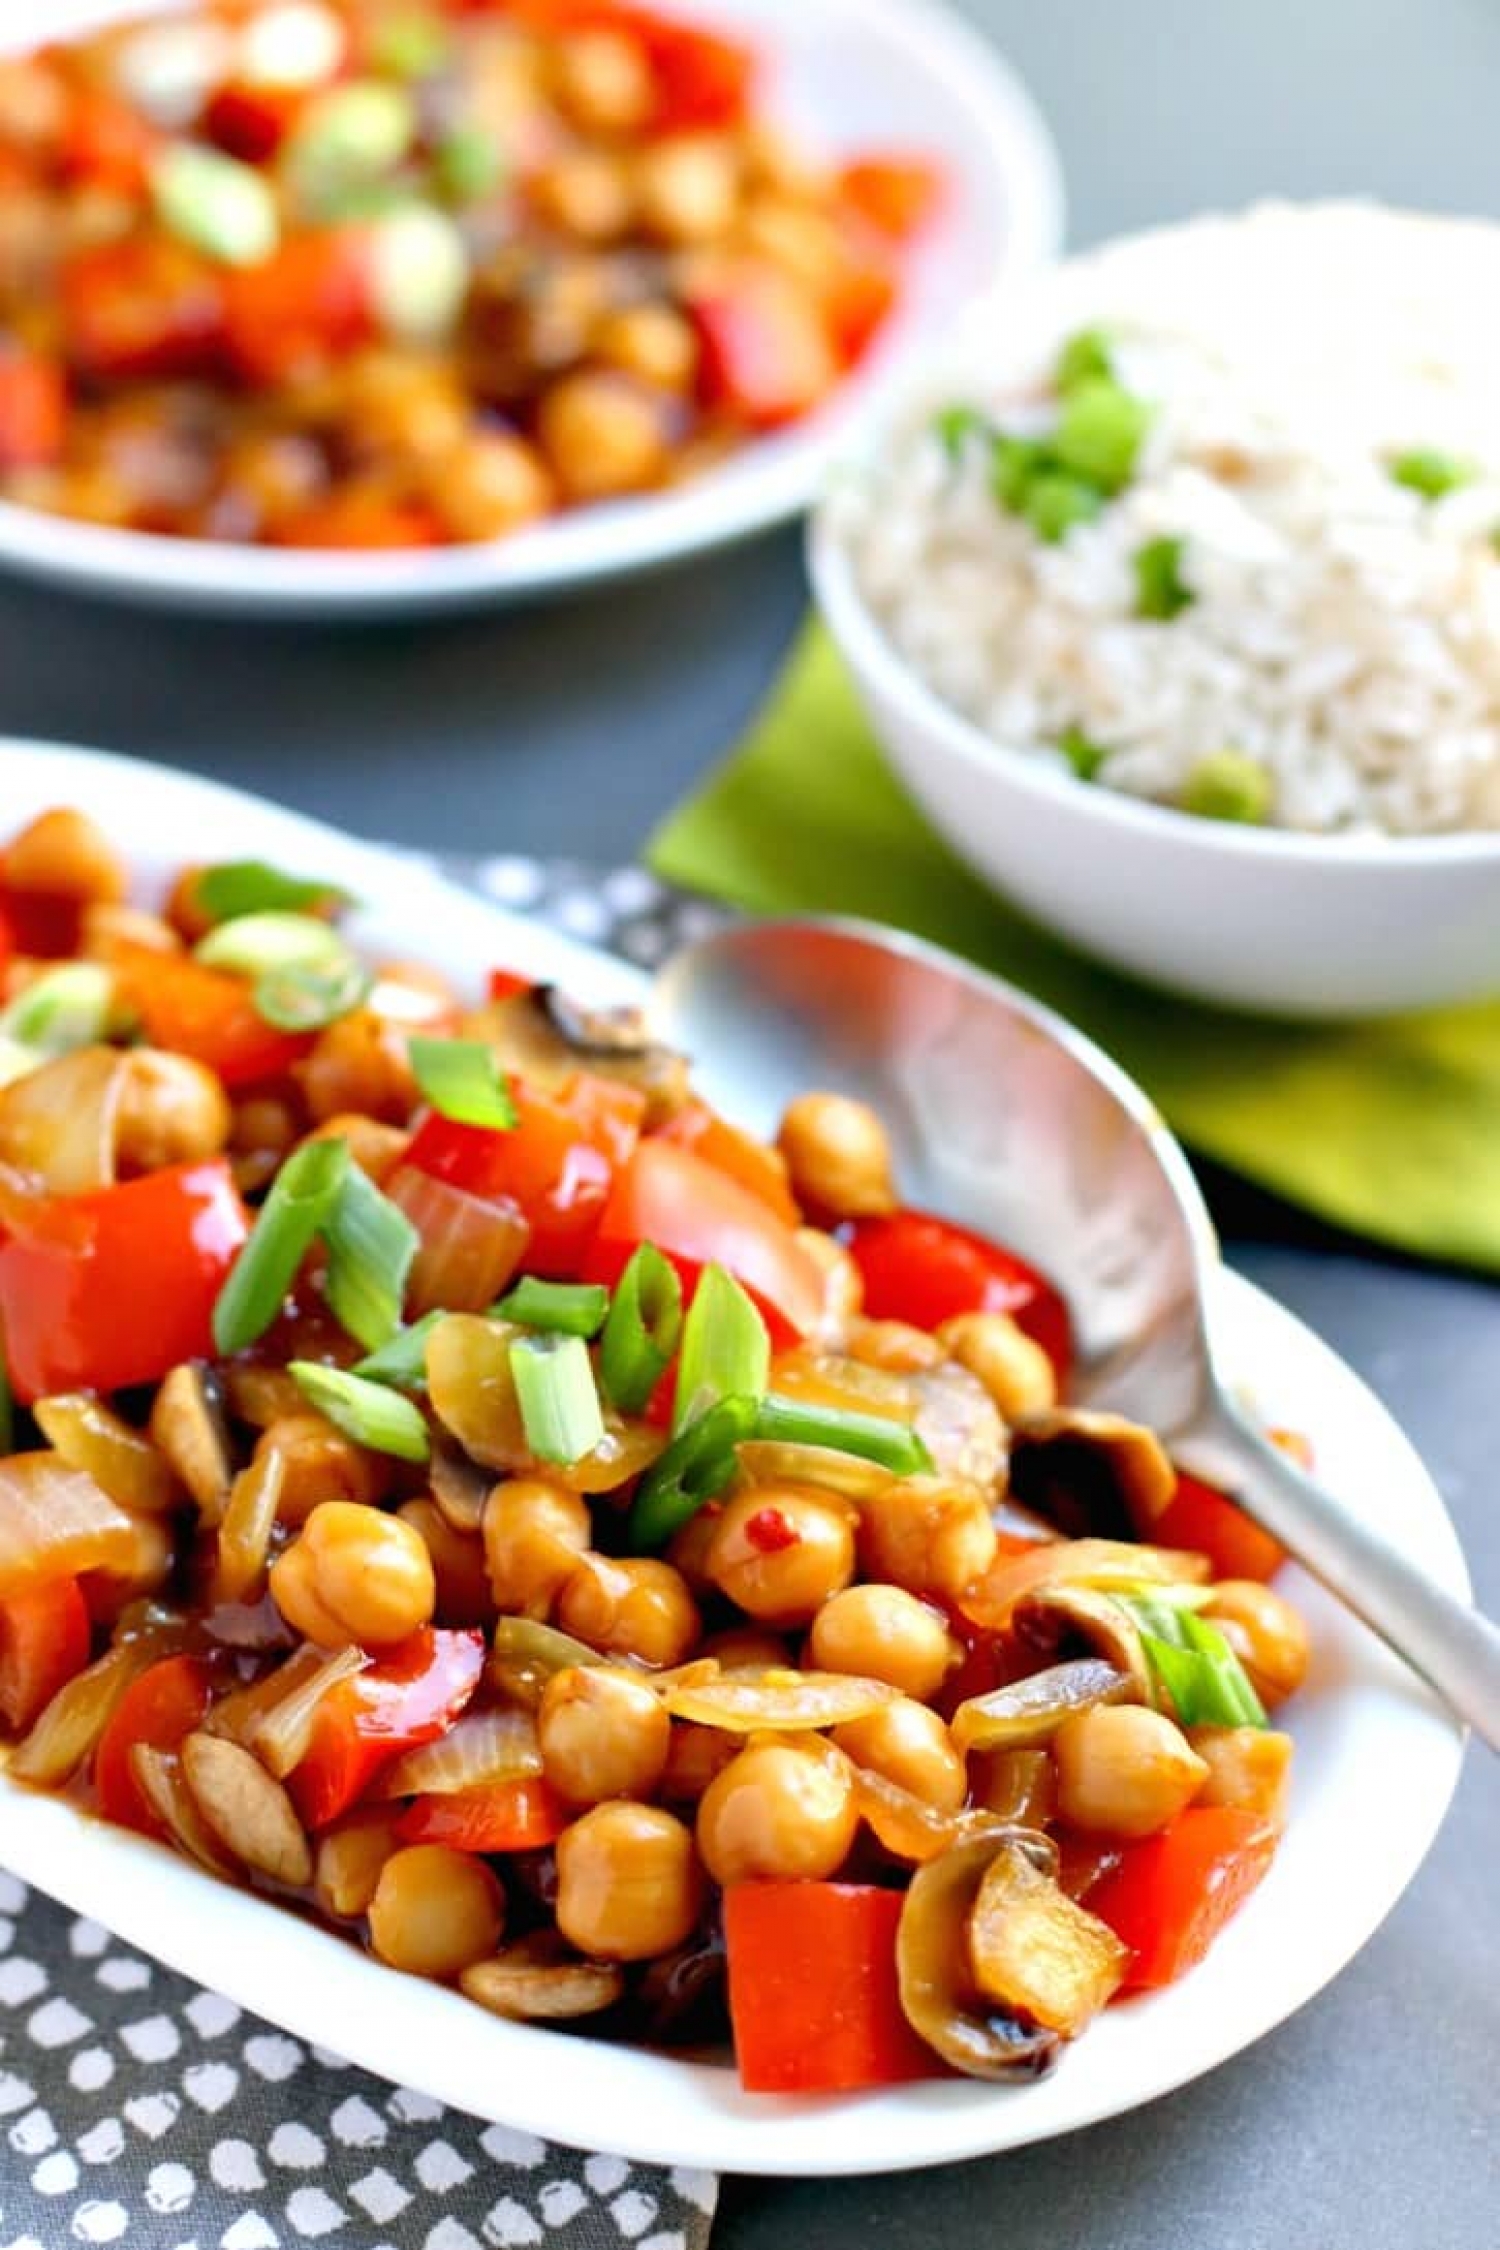 <p>Chickpeas are an excellent alternative to tofu for all of your vegetarian stir fry needs. <a href="https://www.veggiessavetheday.com/chickpea-stir-fry/" rel="noopener">This recipe</a> tosses them with a handful of veggies in a simple sauce that believe it or not, doesn't require any oil!</p>